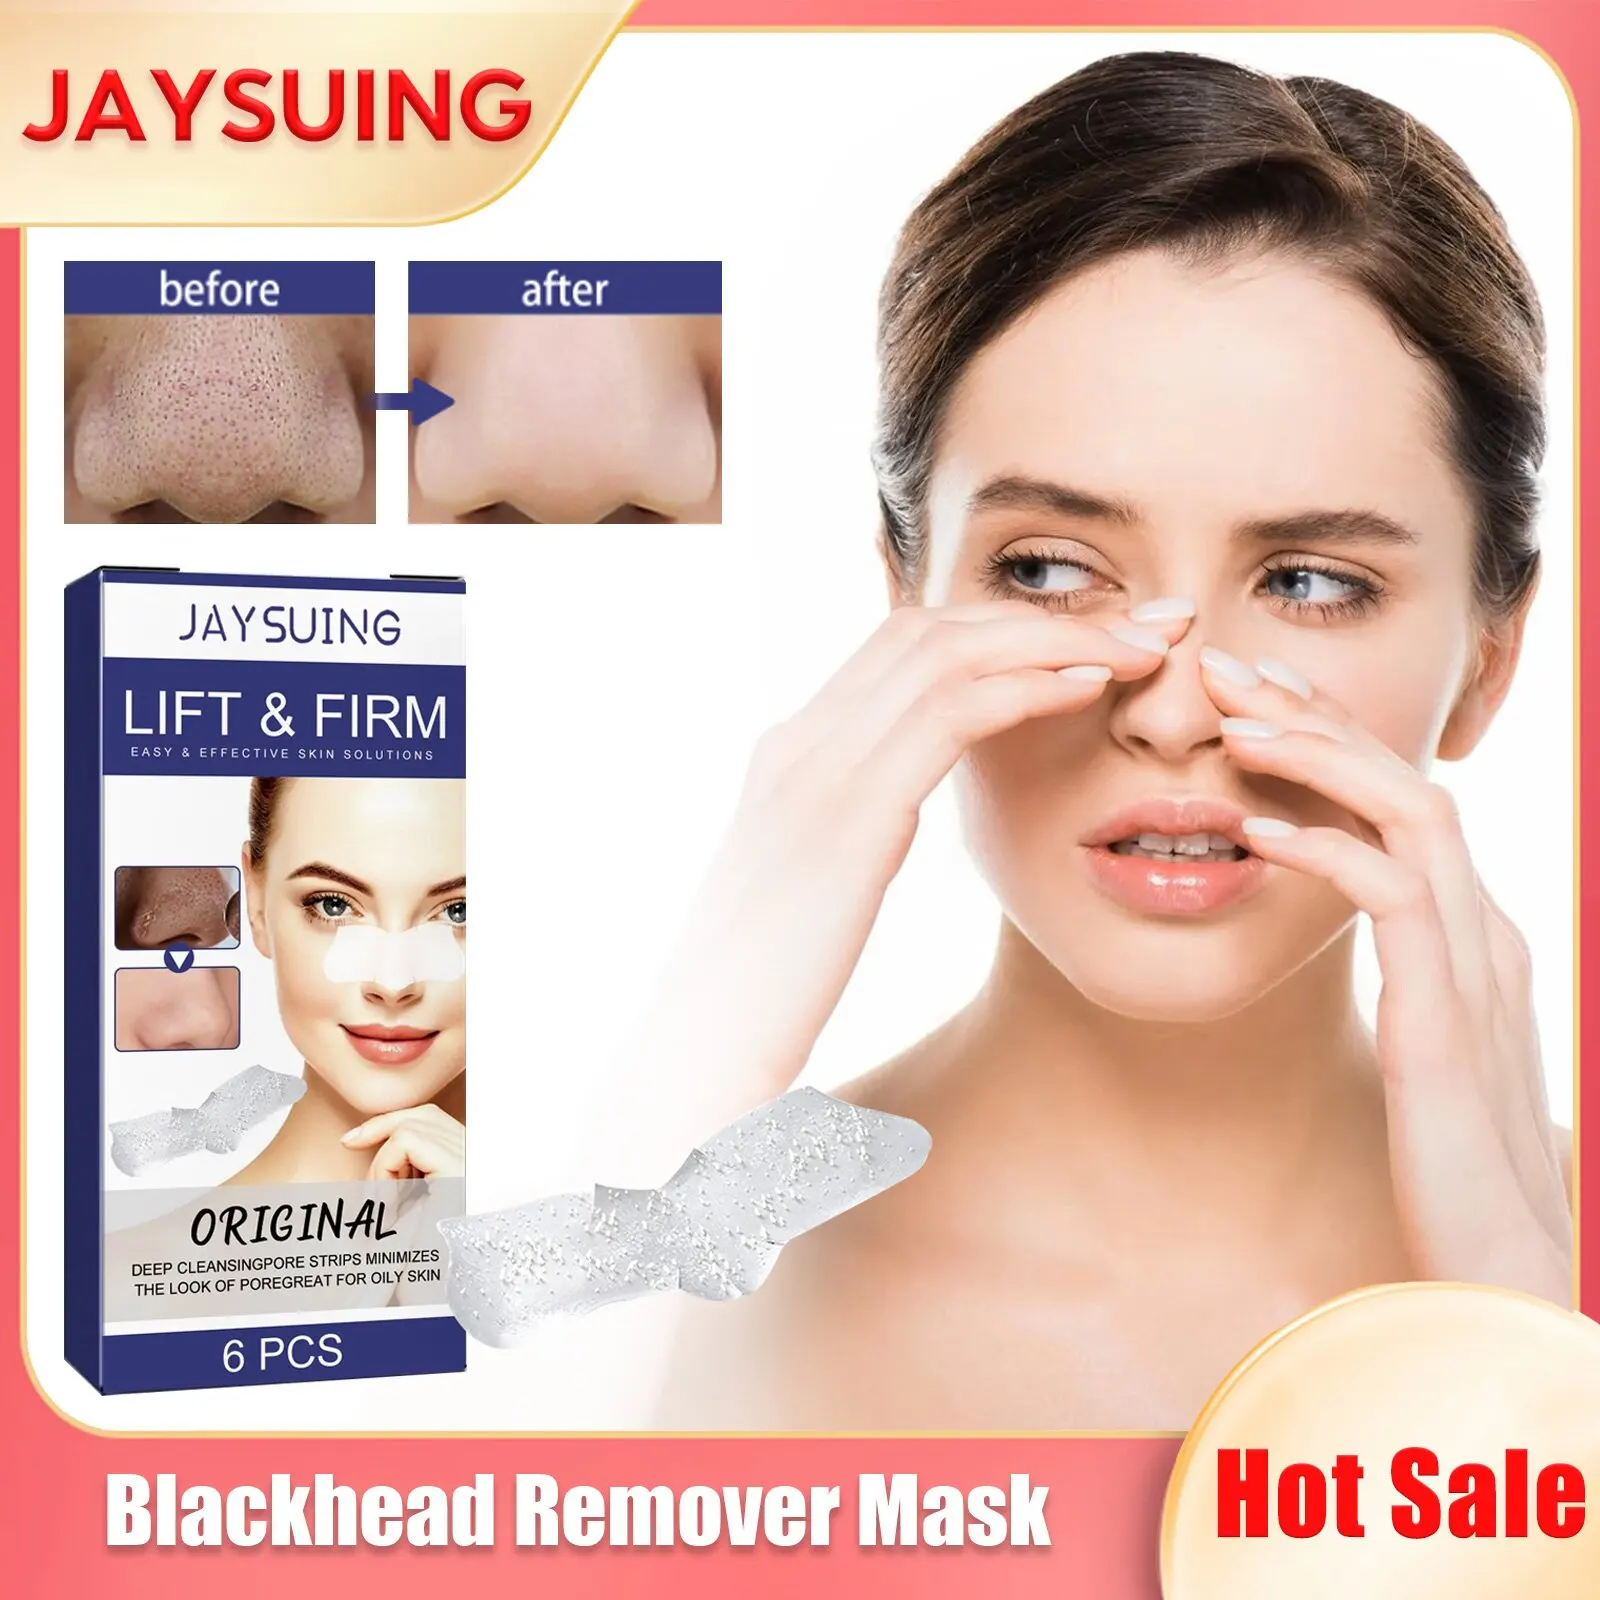 Blackhead Remover Mask Nose Black Dots Removal Pimples Shrink Pores Soften Cuticle Peelings Deep Cleansing Acne Treatment Mask aloe soothing gel acne treatment shrink pores pimple removal oil control fade blemish marks moisturizing improve peelings cream